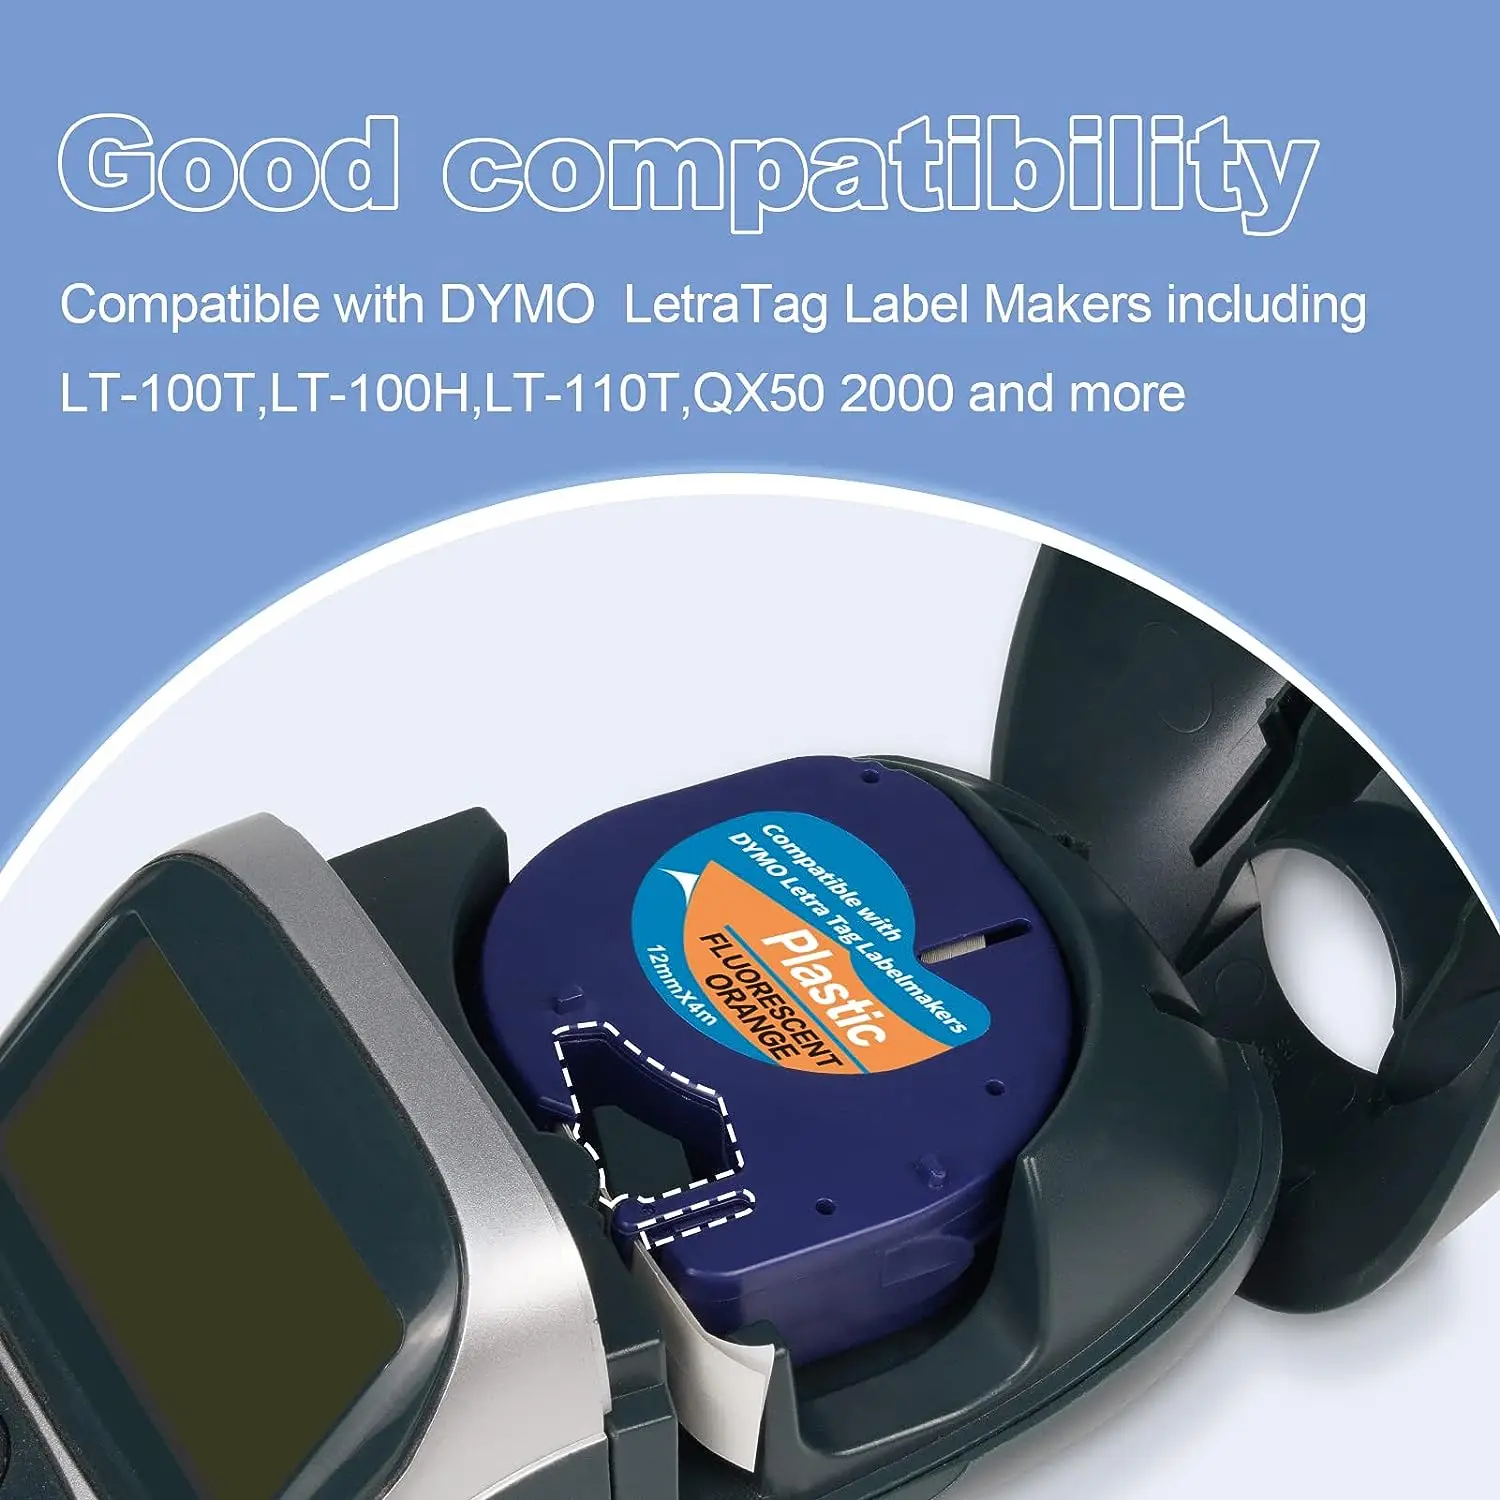 1pcs 91201 12267 for Dymo Letratag 91200 91202 12mm LT Label Tapes Compatible for Dymo Letratag LT-100H LT-100T Plus Label Maker